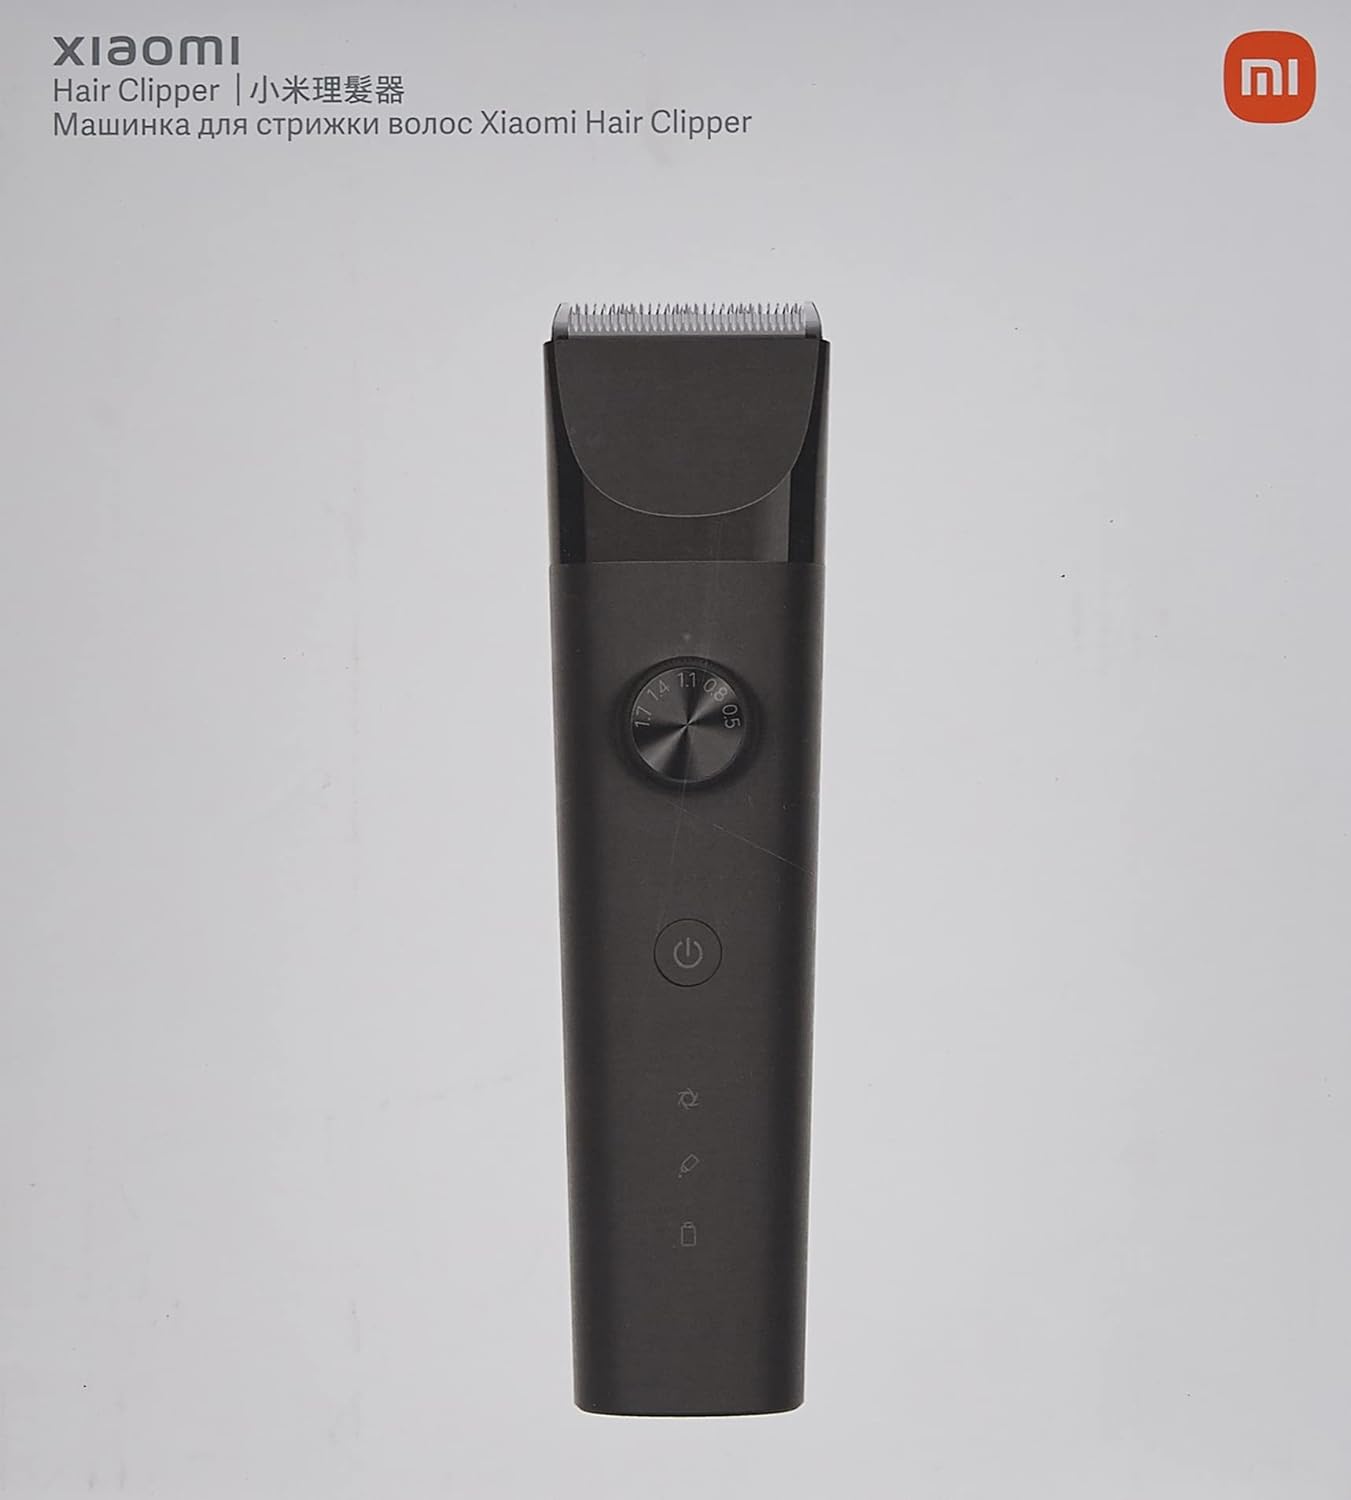 Xiaomi Hair Clipper 14 length comb settings 5 length micro settings from 0.5mm to 1.7mm 180 minute long battery